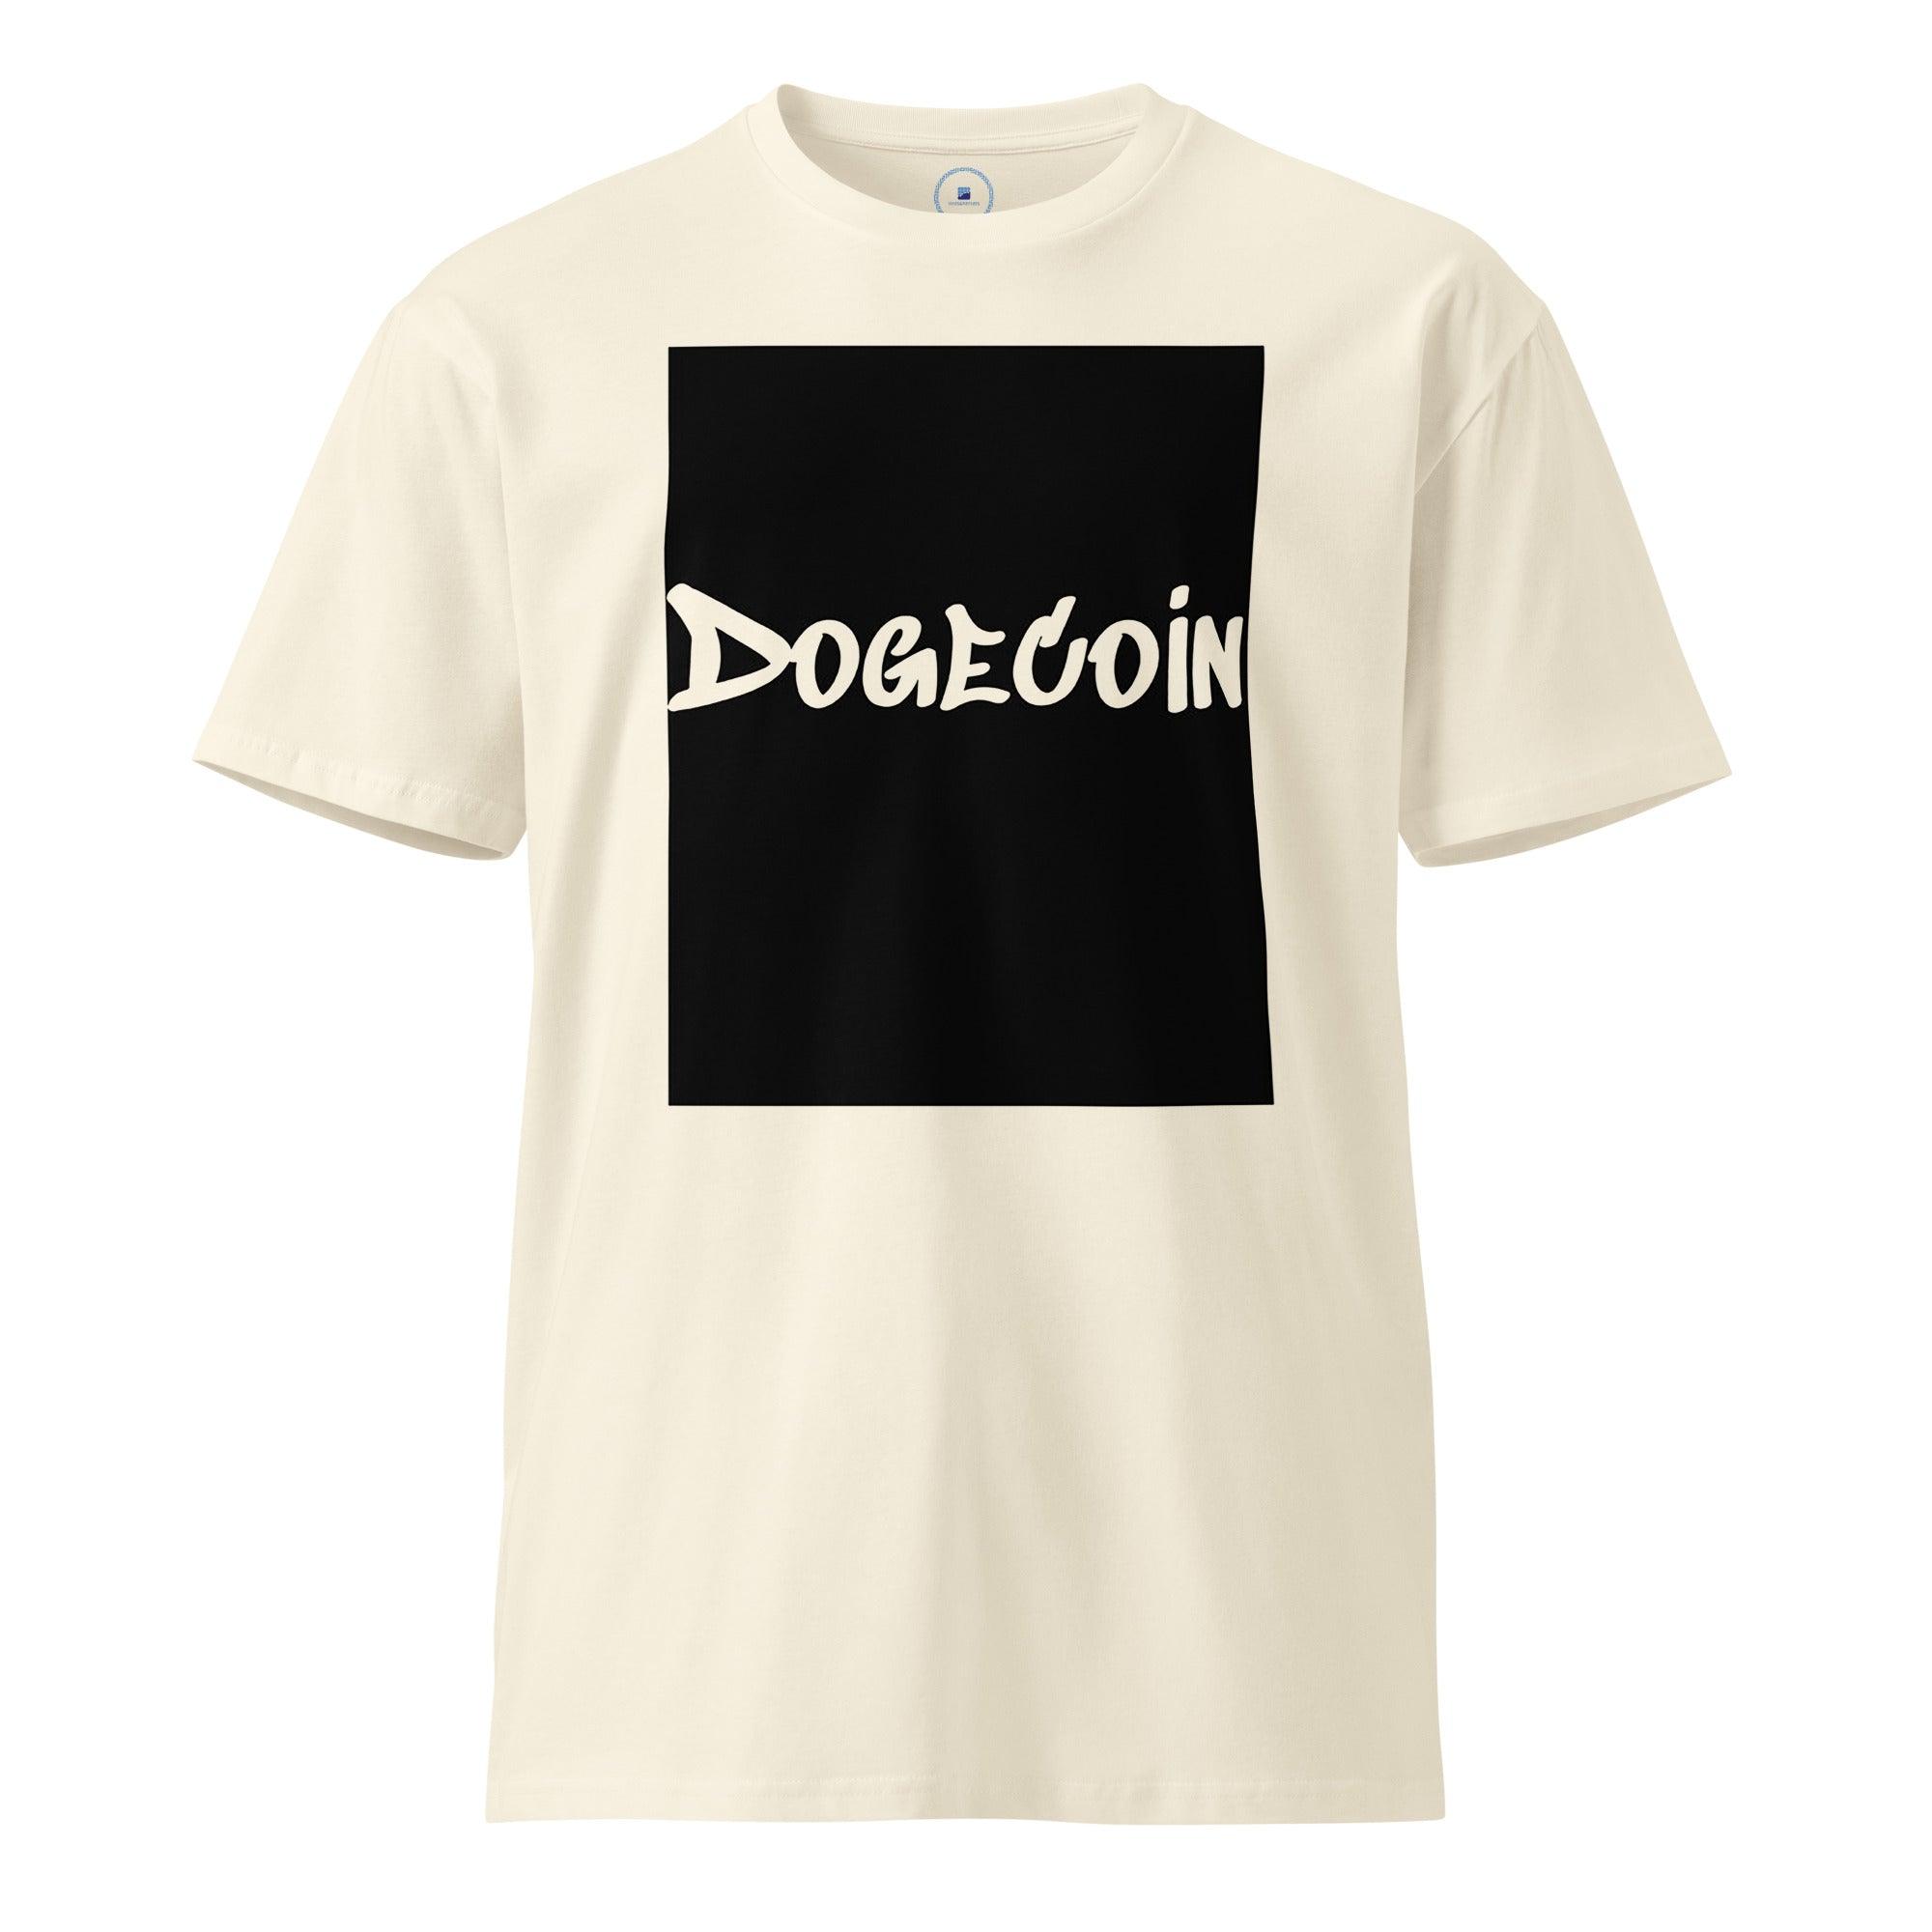 DogeCoin Crypto T-Shirt - InvestmenTees